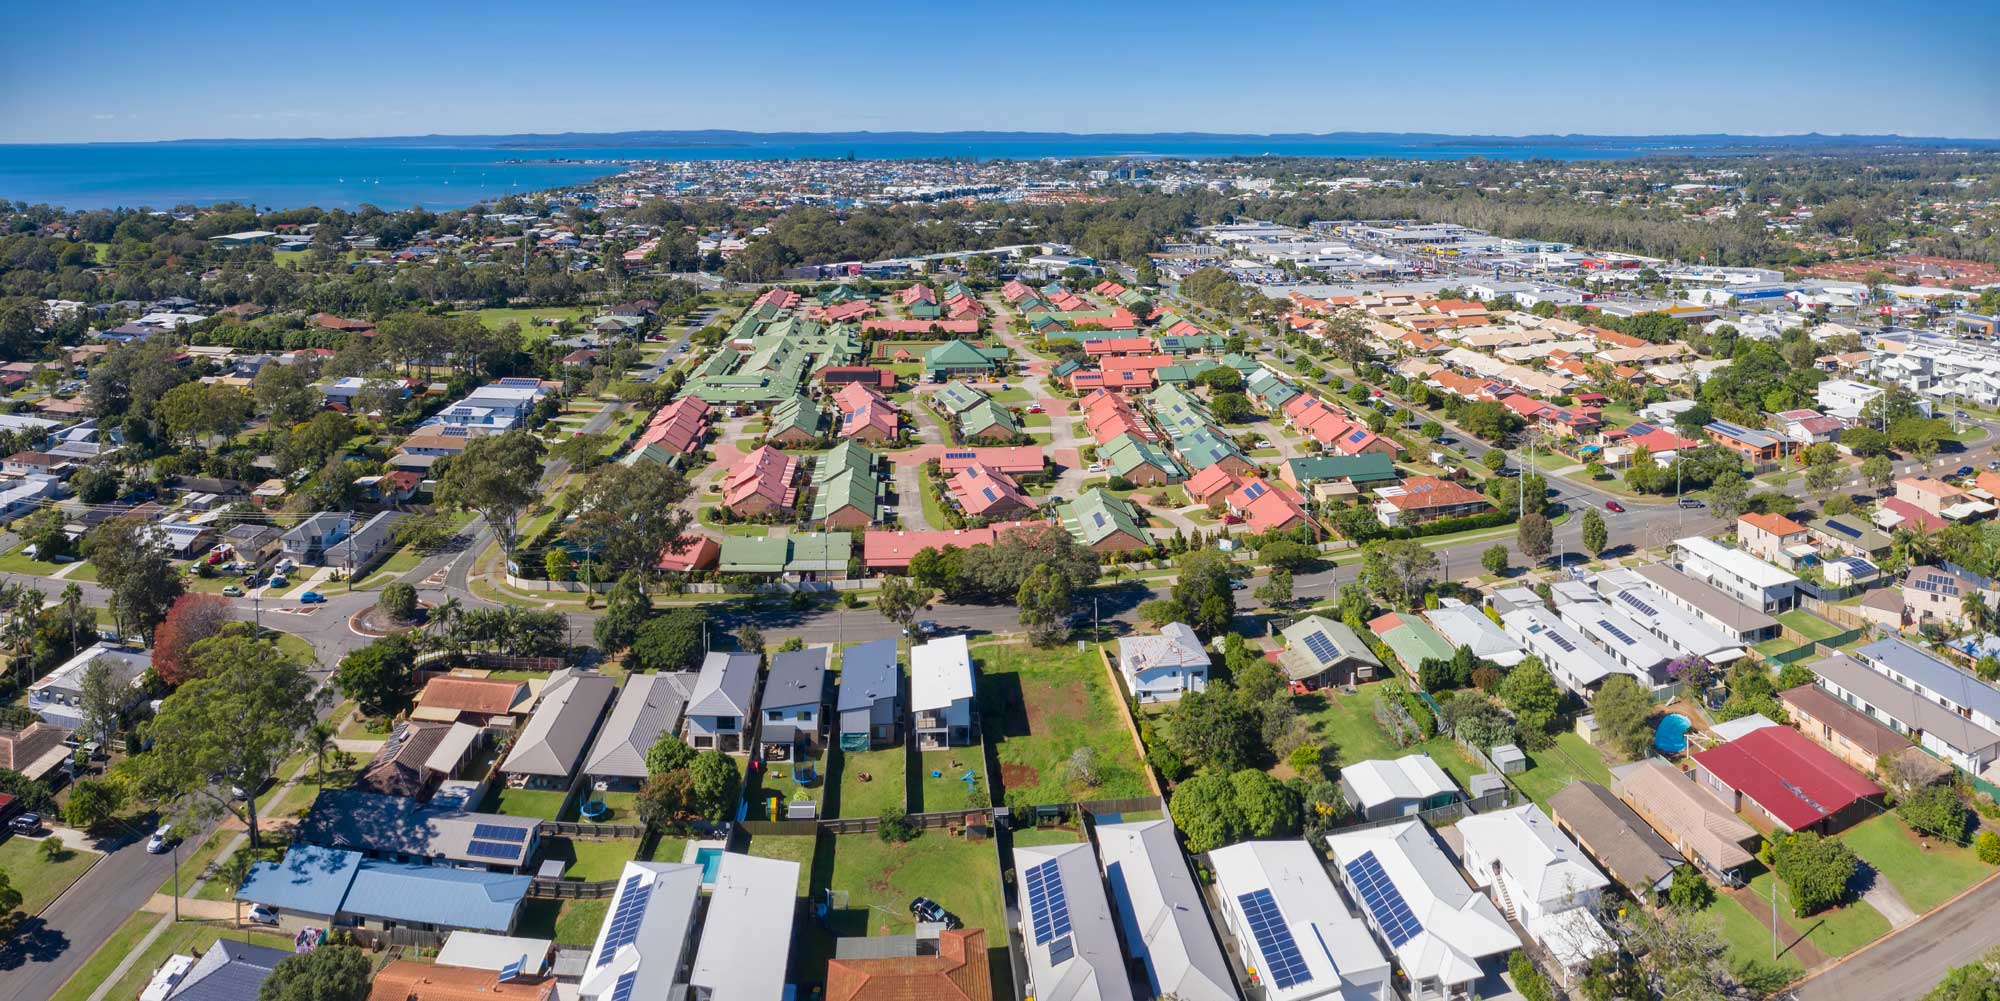 drone photography for property sub division marketing at Ormiston, Redland Bay area